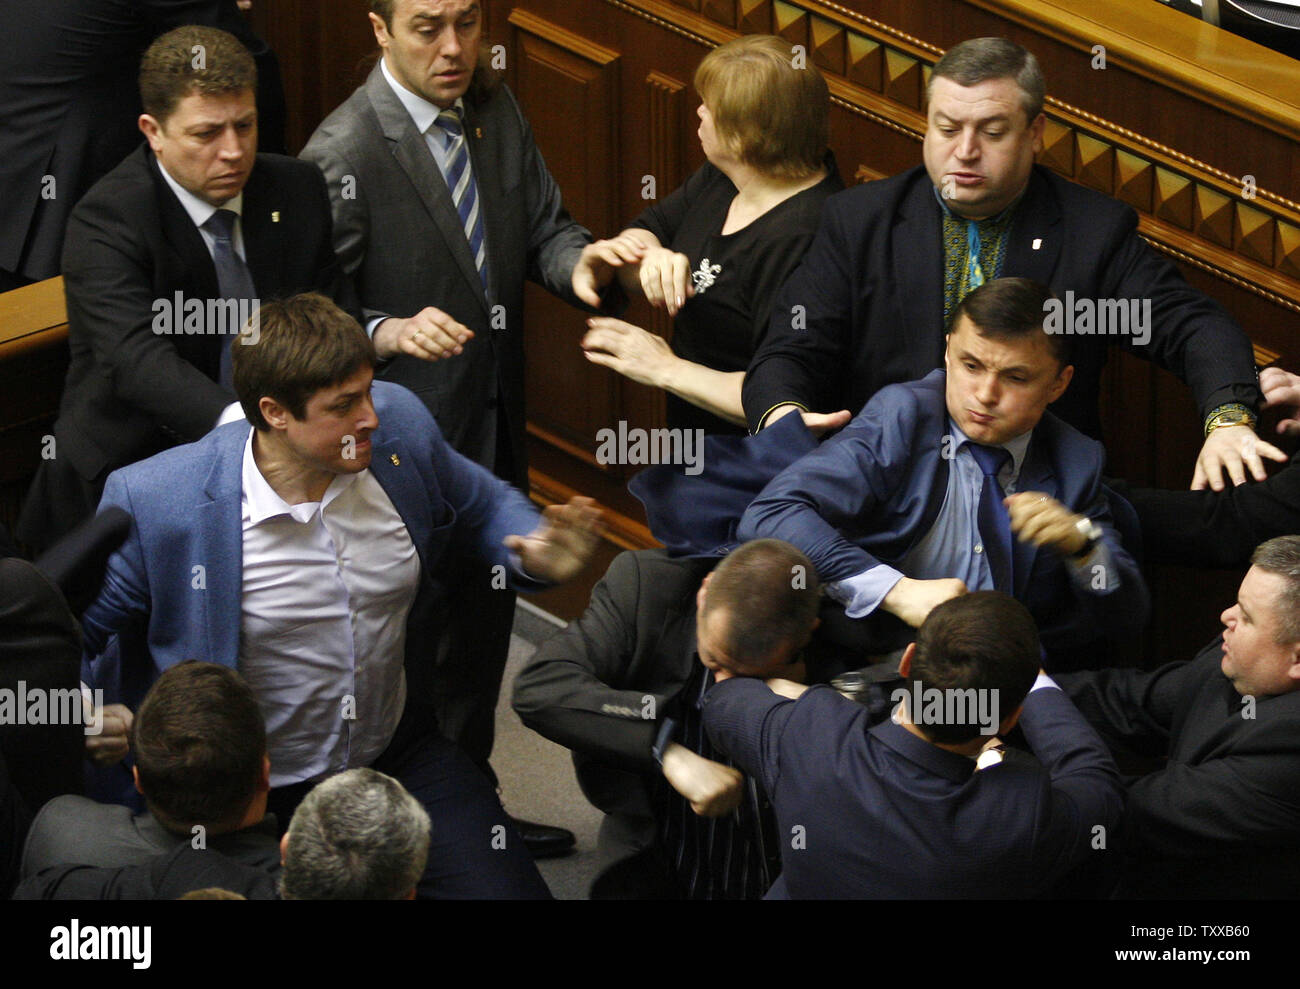 Ukrainian lawmakers from Communist Party and the radical nationalist right-wing Svoboda (Freedom) Party fight during a parliament session in Kiev on April 8, 2014.    The fight was provoked by different opinions on what is causing the unrest in eastern Ukraine.   UPI/Ivan Vakolenko Stock Photo